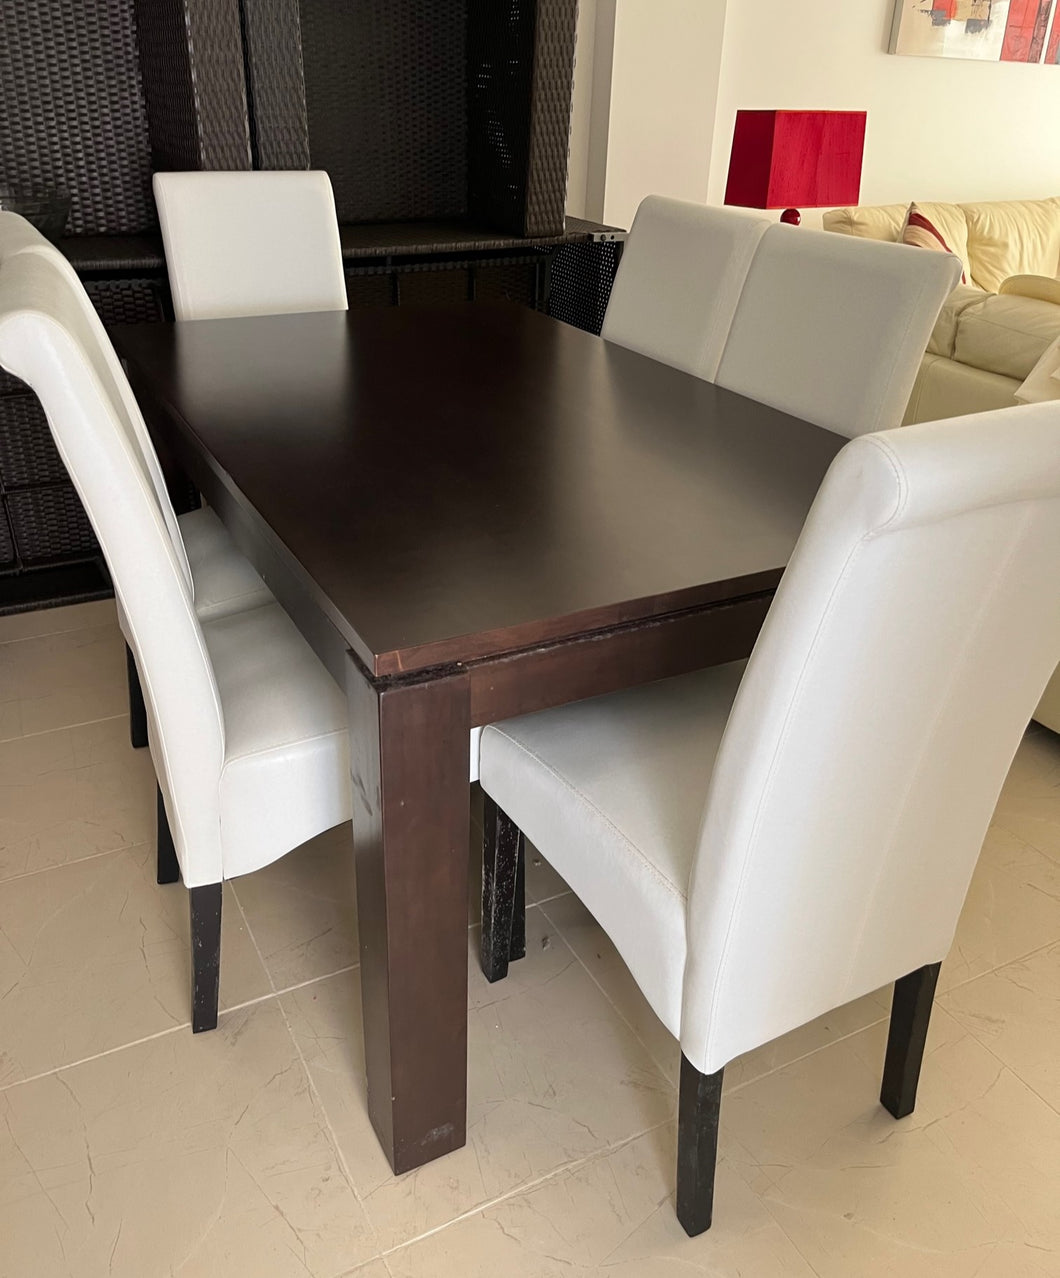 1033 - Wooden dining table + 6 white leather chairs in very good condition.